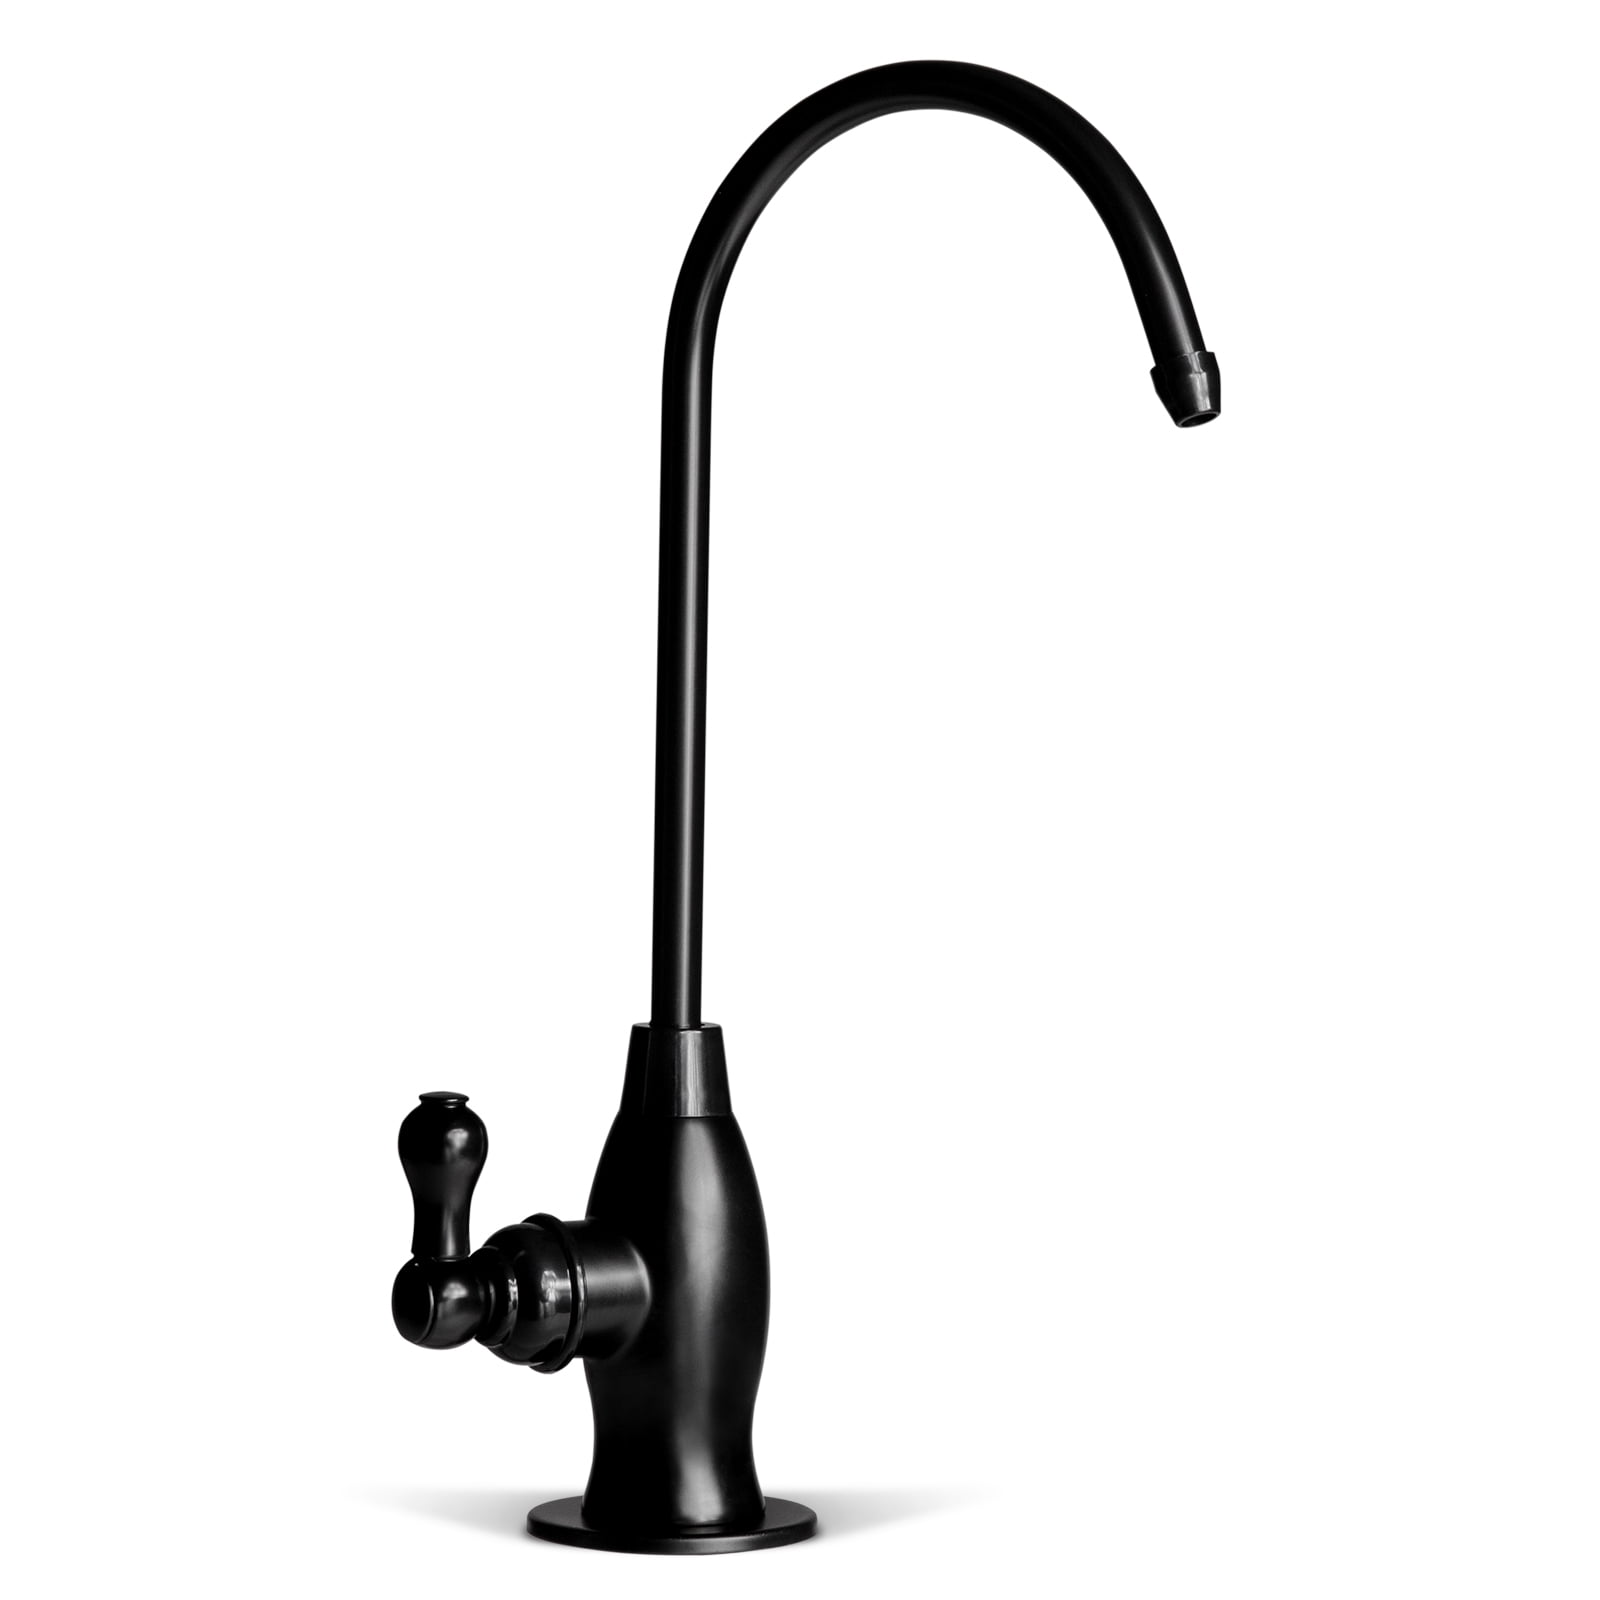 Designers Impressions Oil Rubbed Bronze 2 Handle Tub/Shower Combo Faucet  654752 